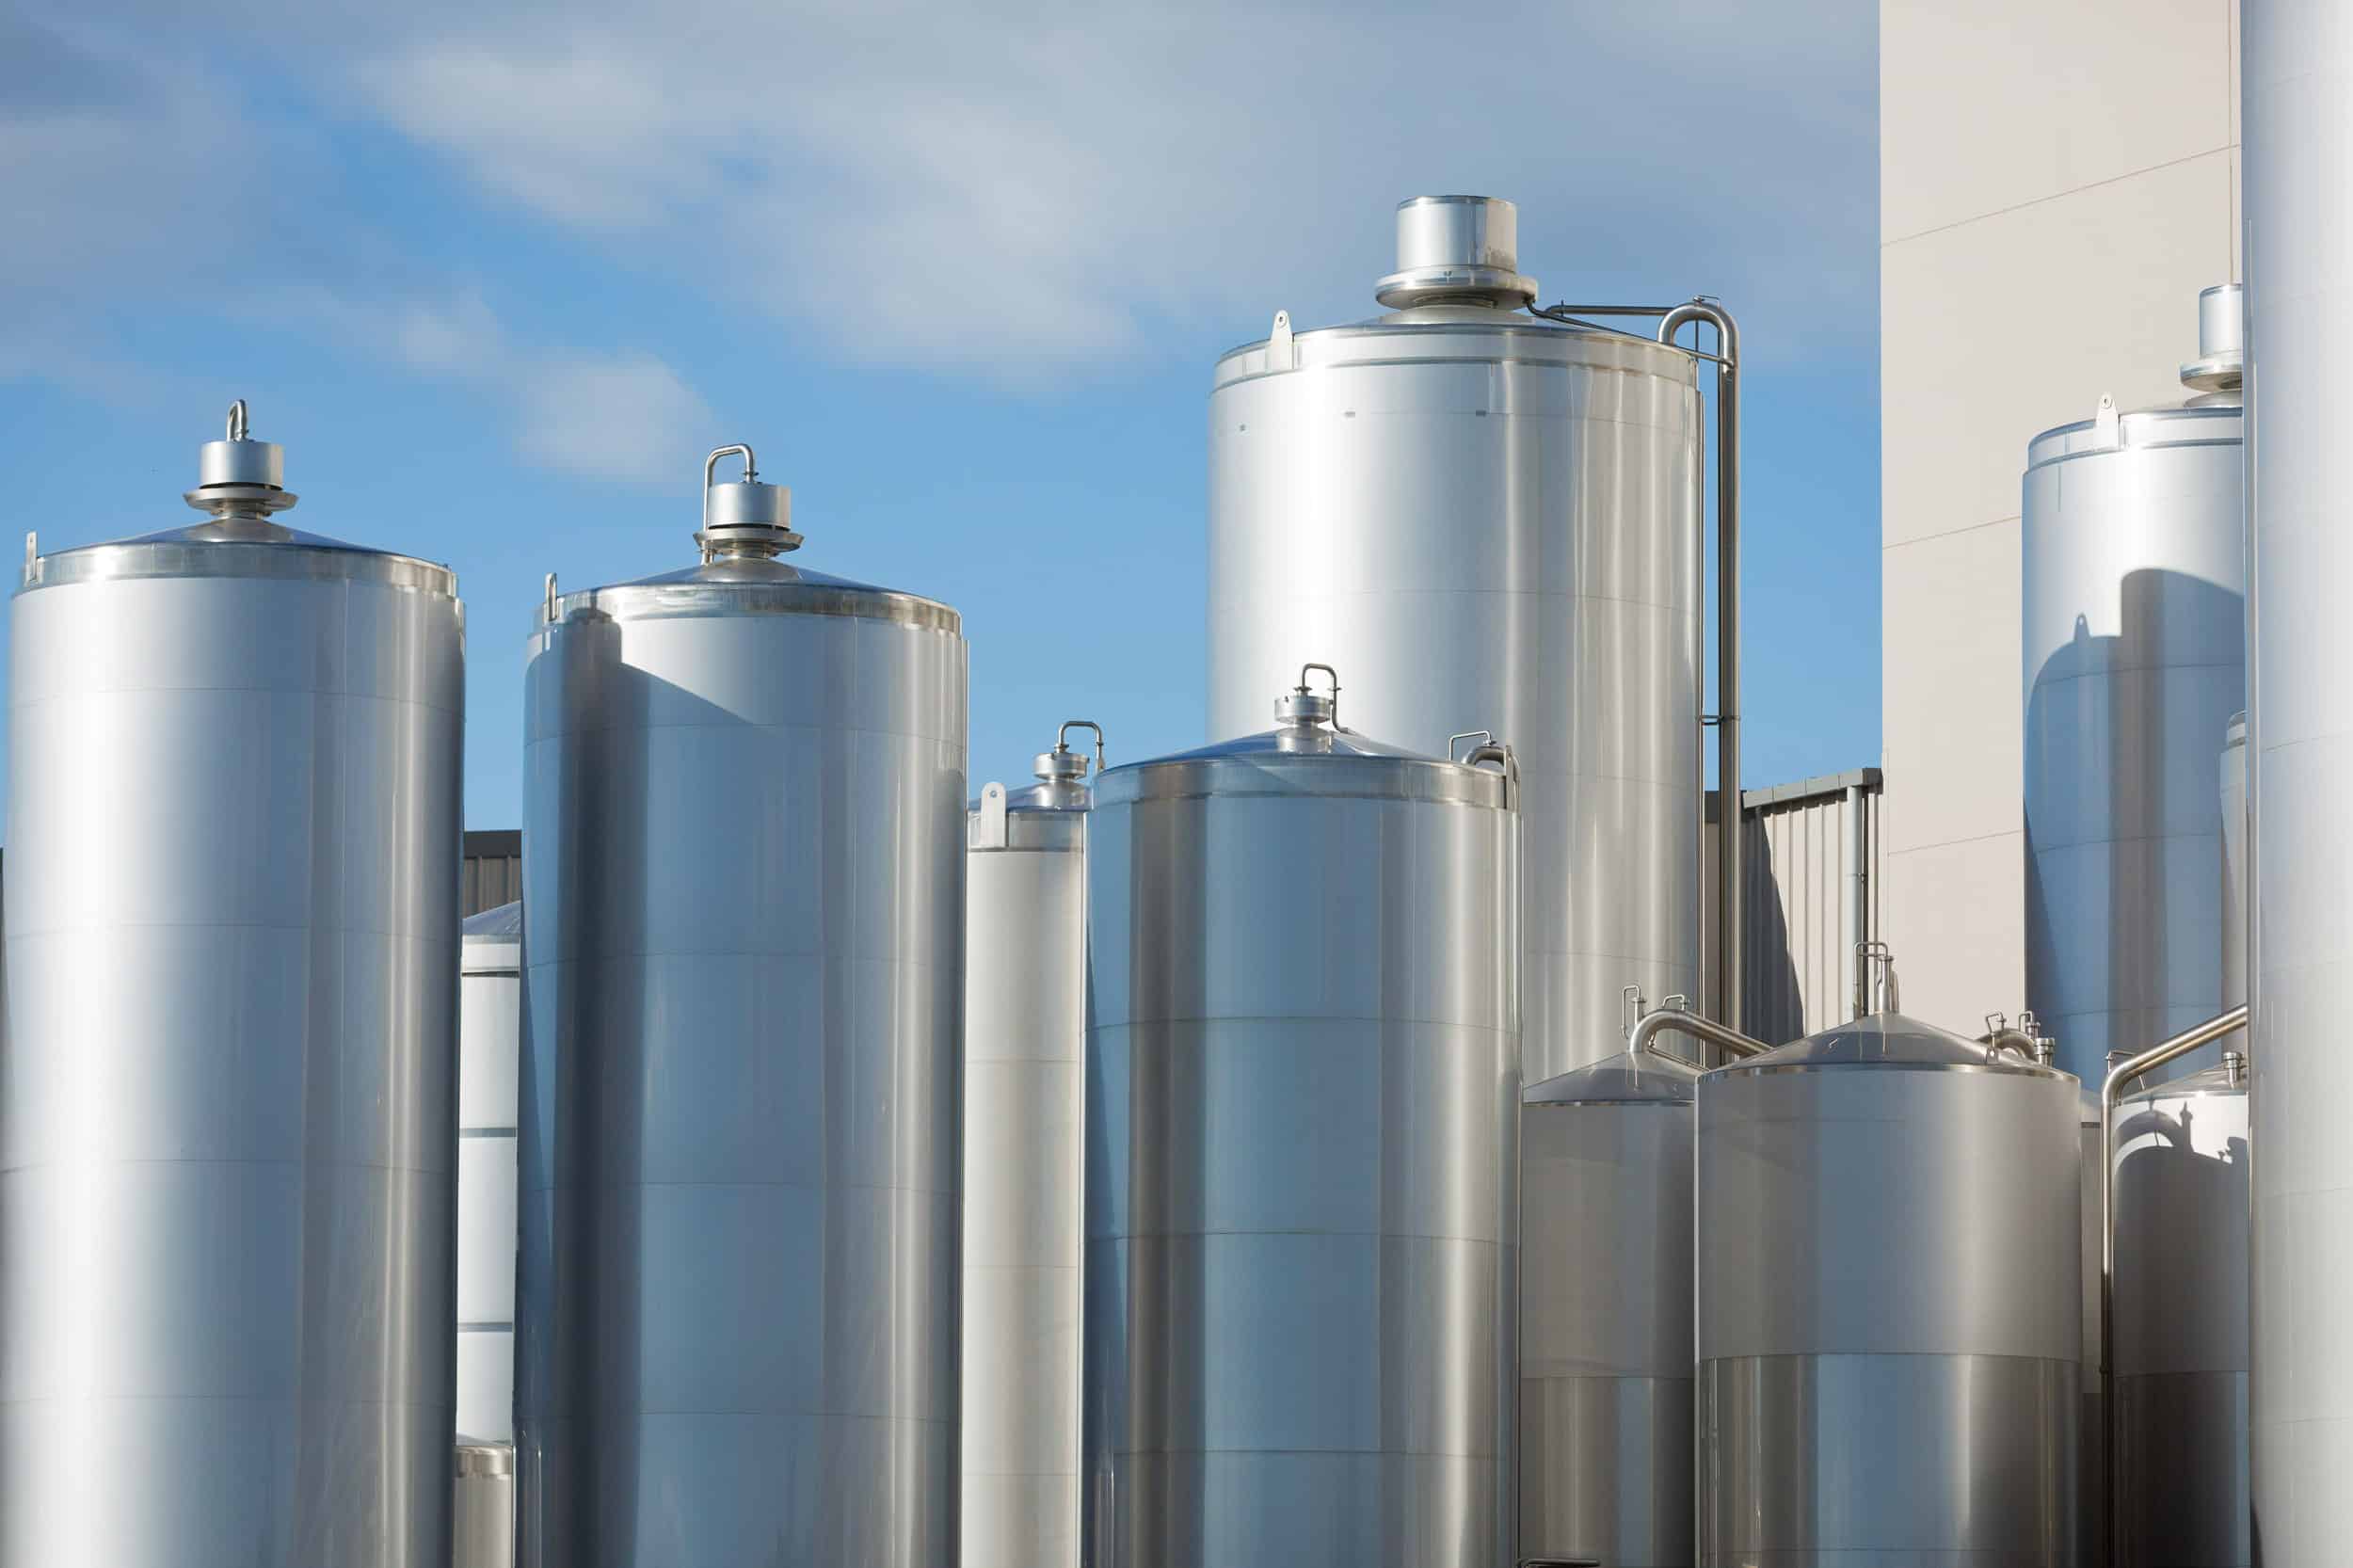 Stainless steel milk vats at processing factory, Canterbury.